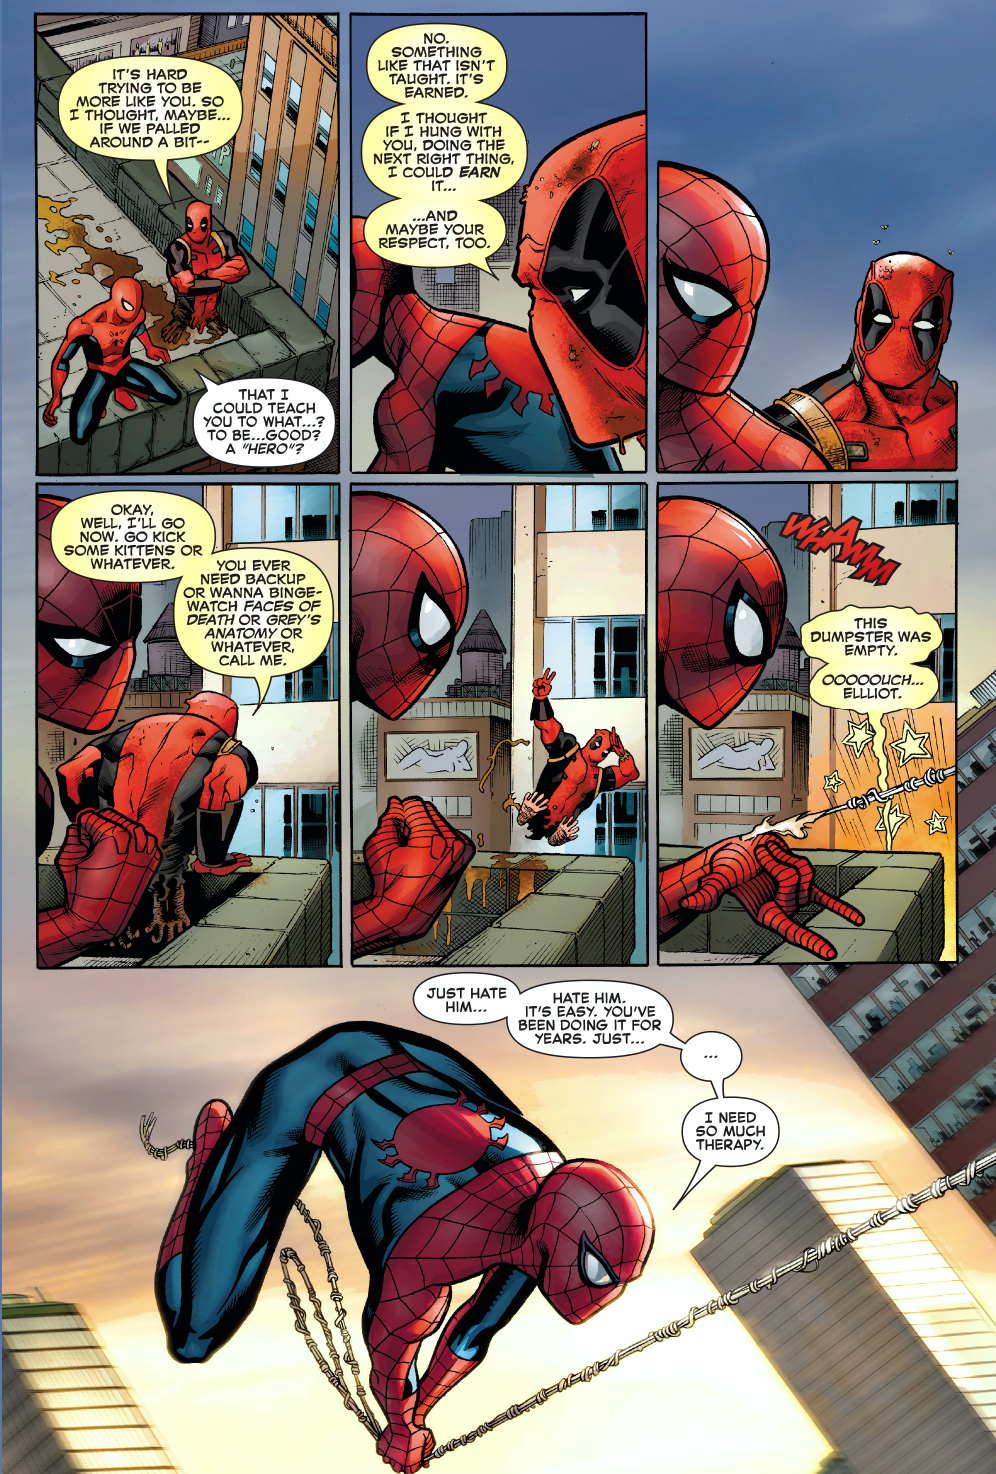 why deadpool wants to hang around with spider-man 